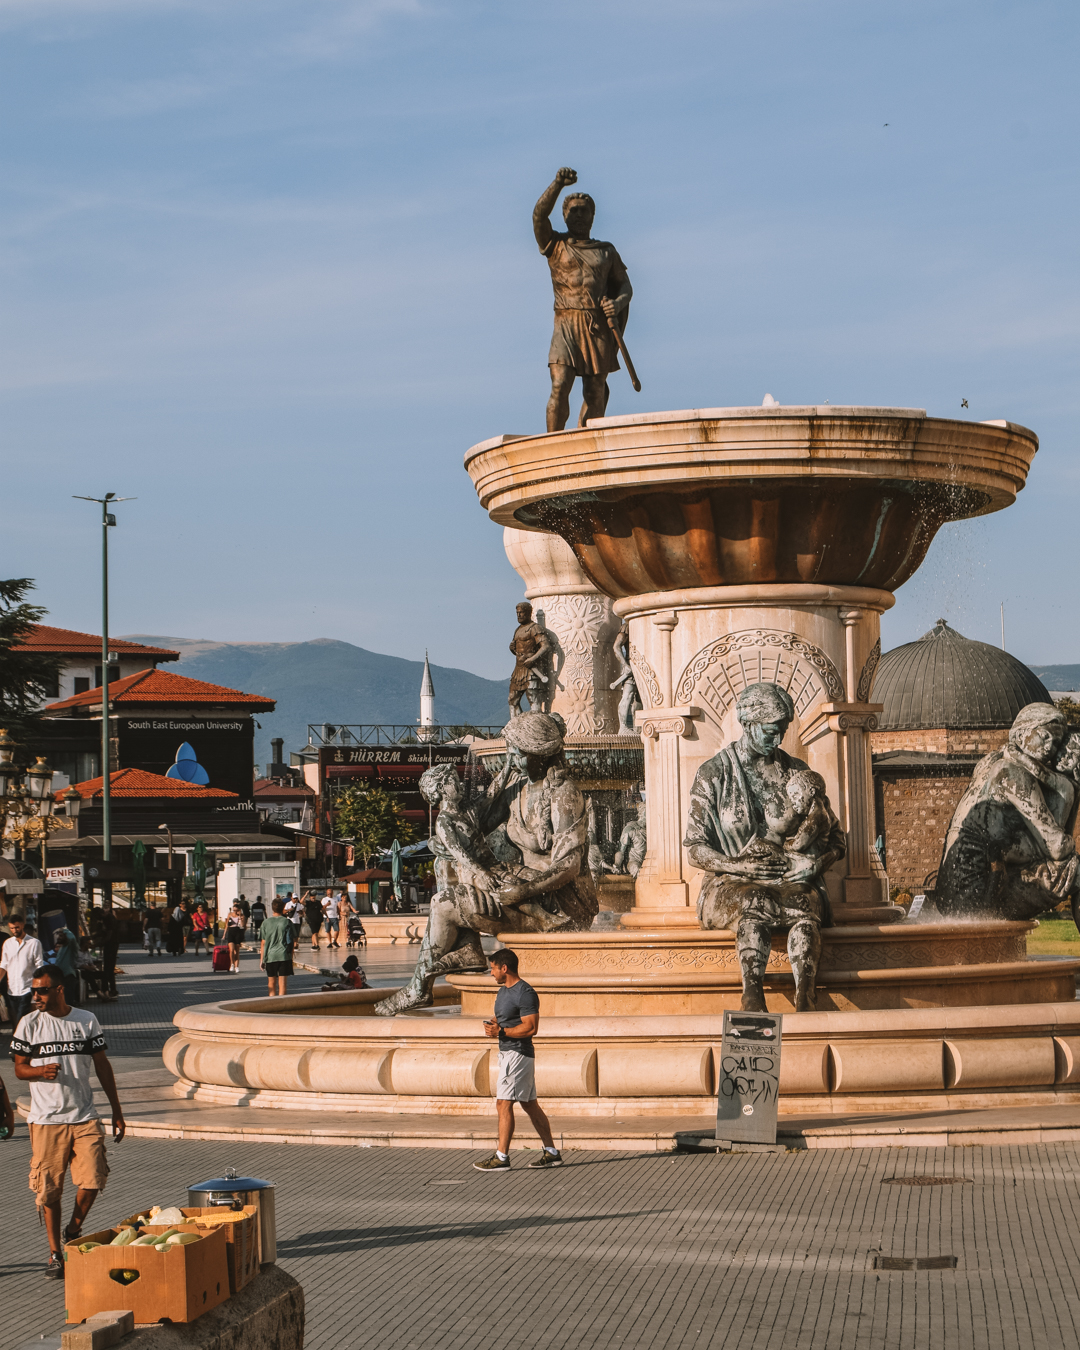 Marvel at the sculptures in Macedonia square